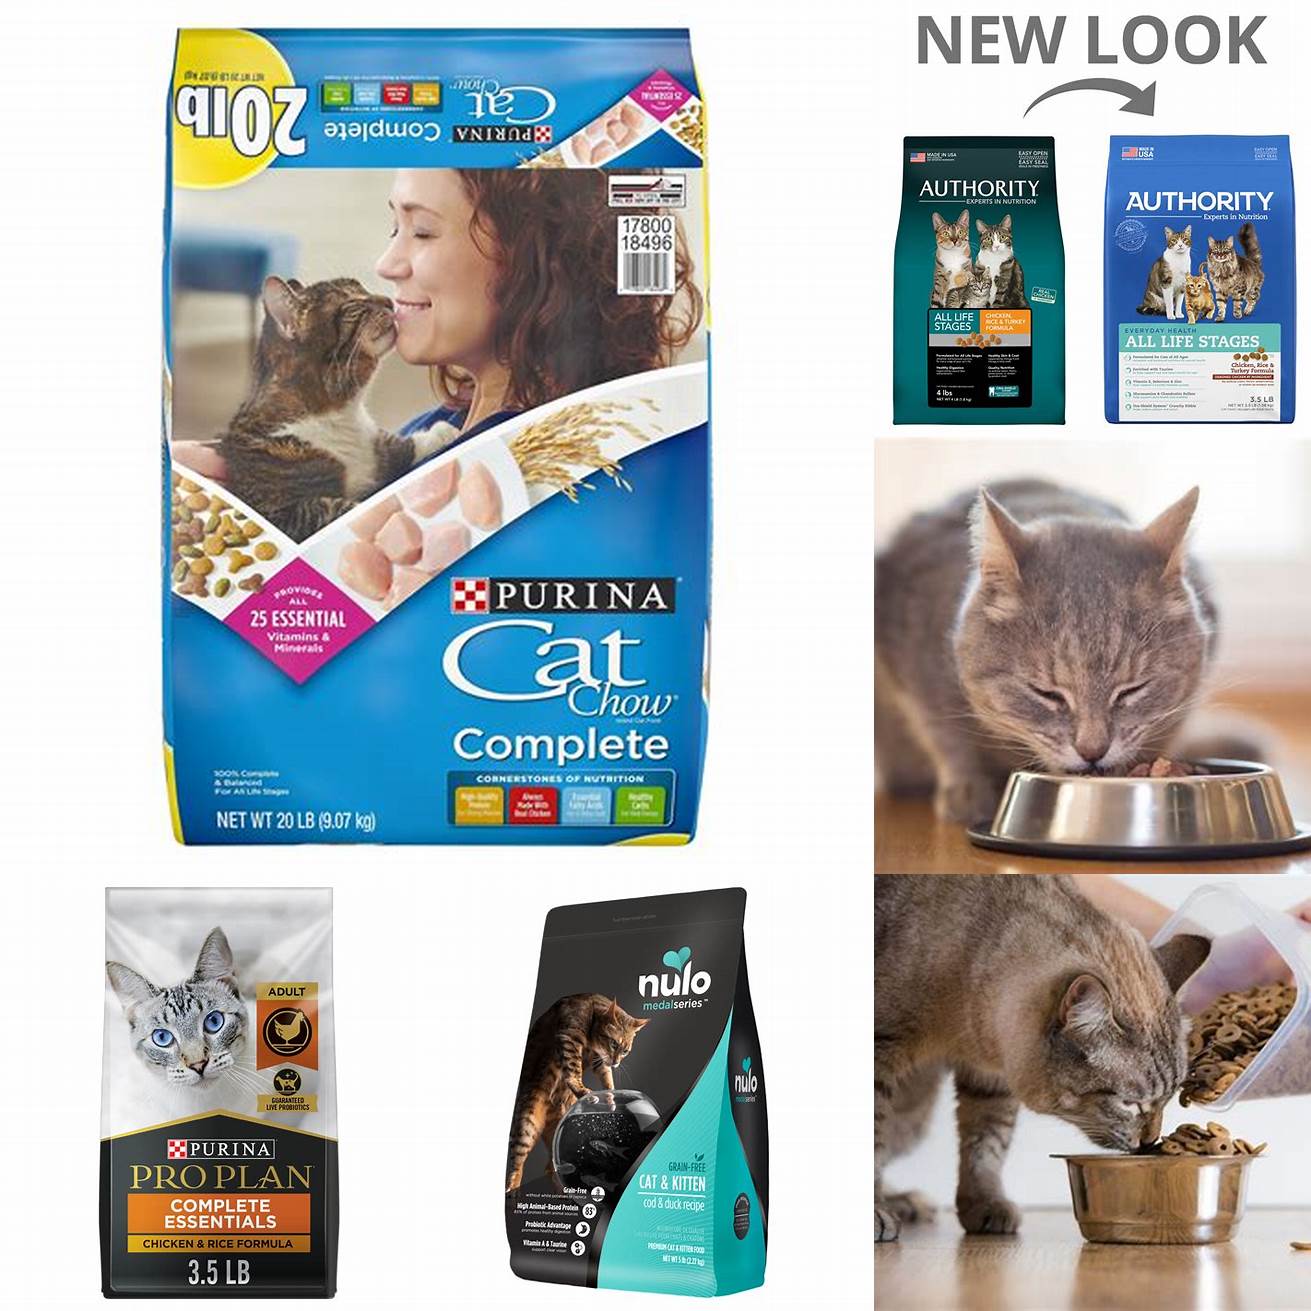 Choose a food that is formulated for your cats life stage and health needs